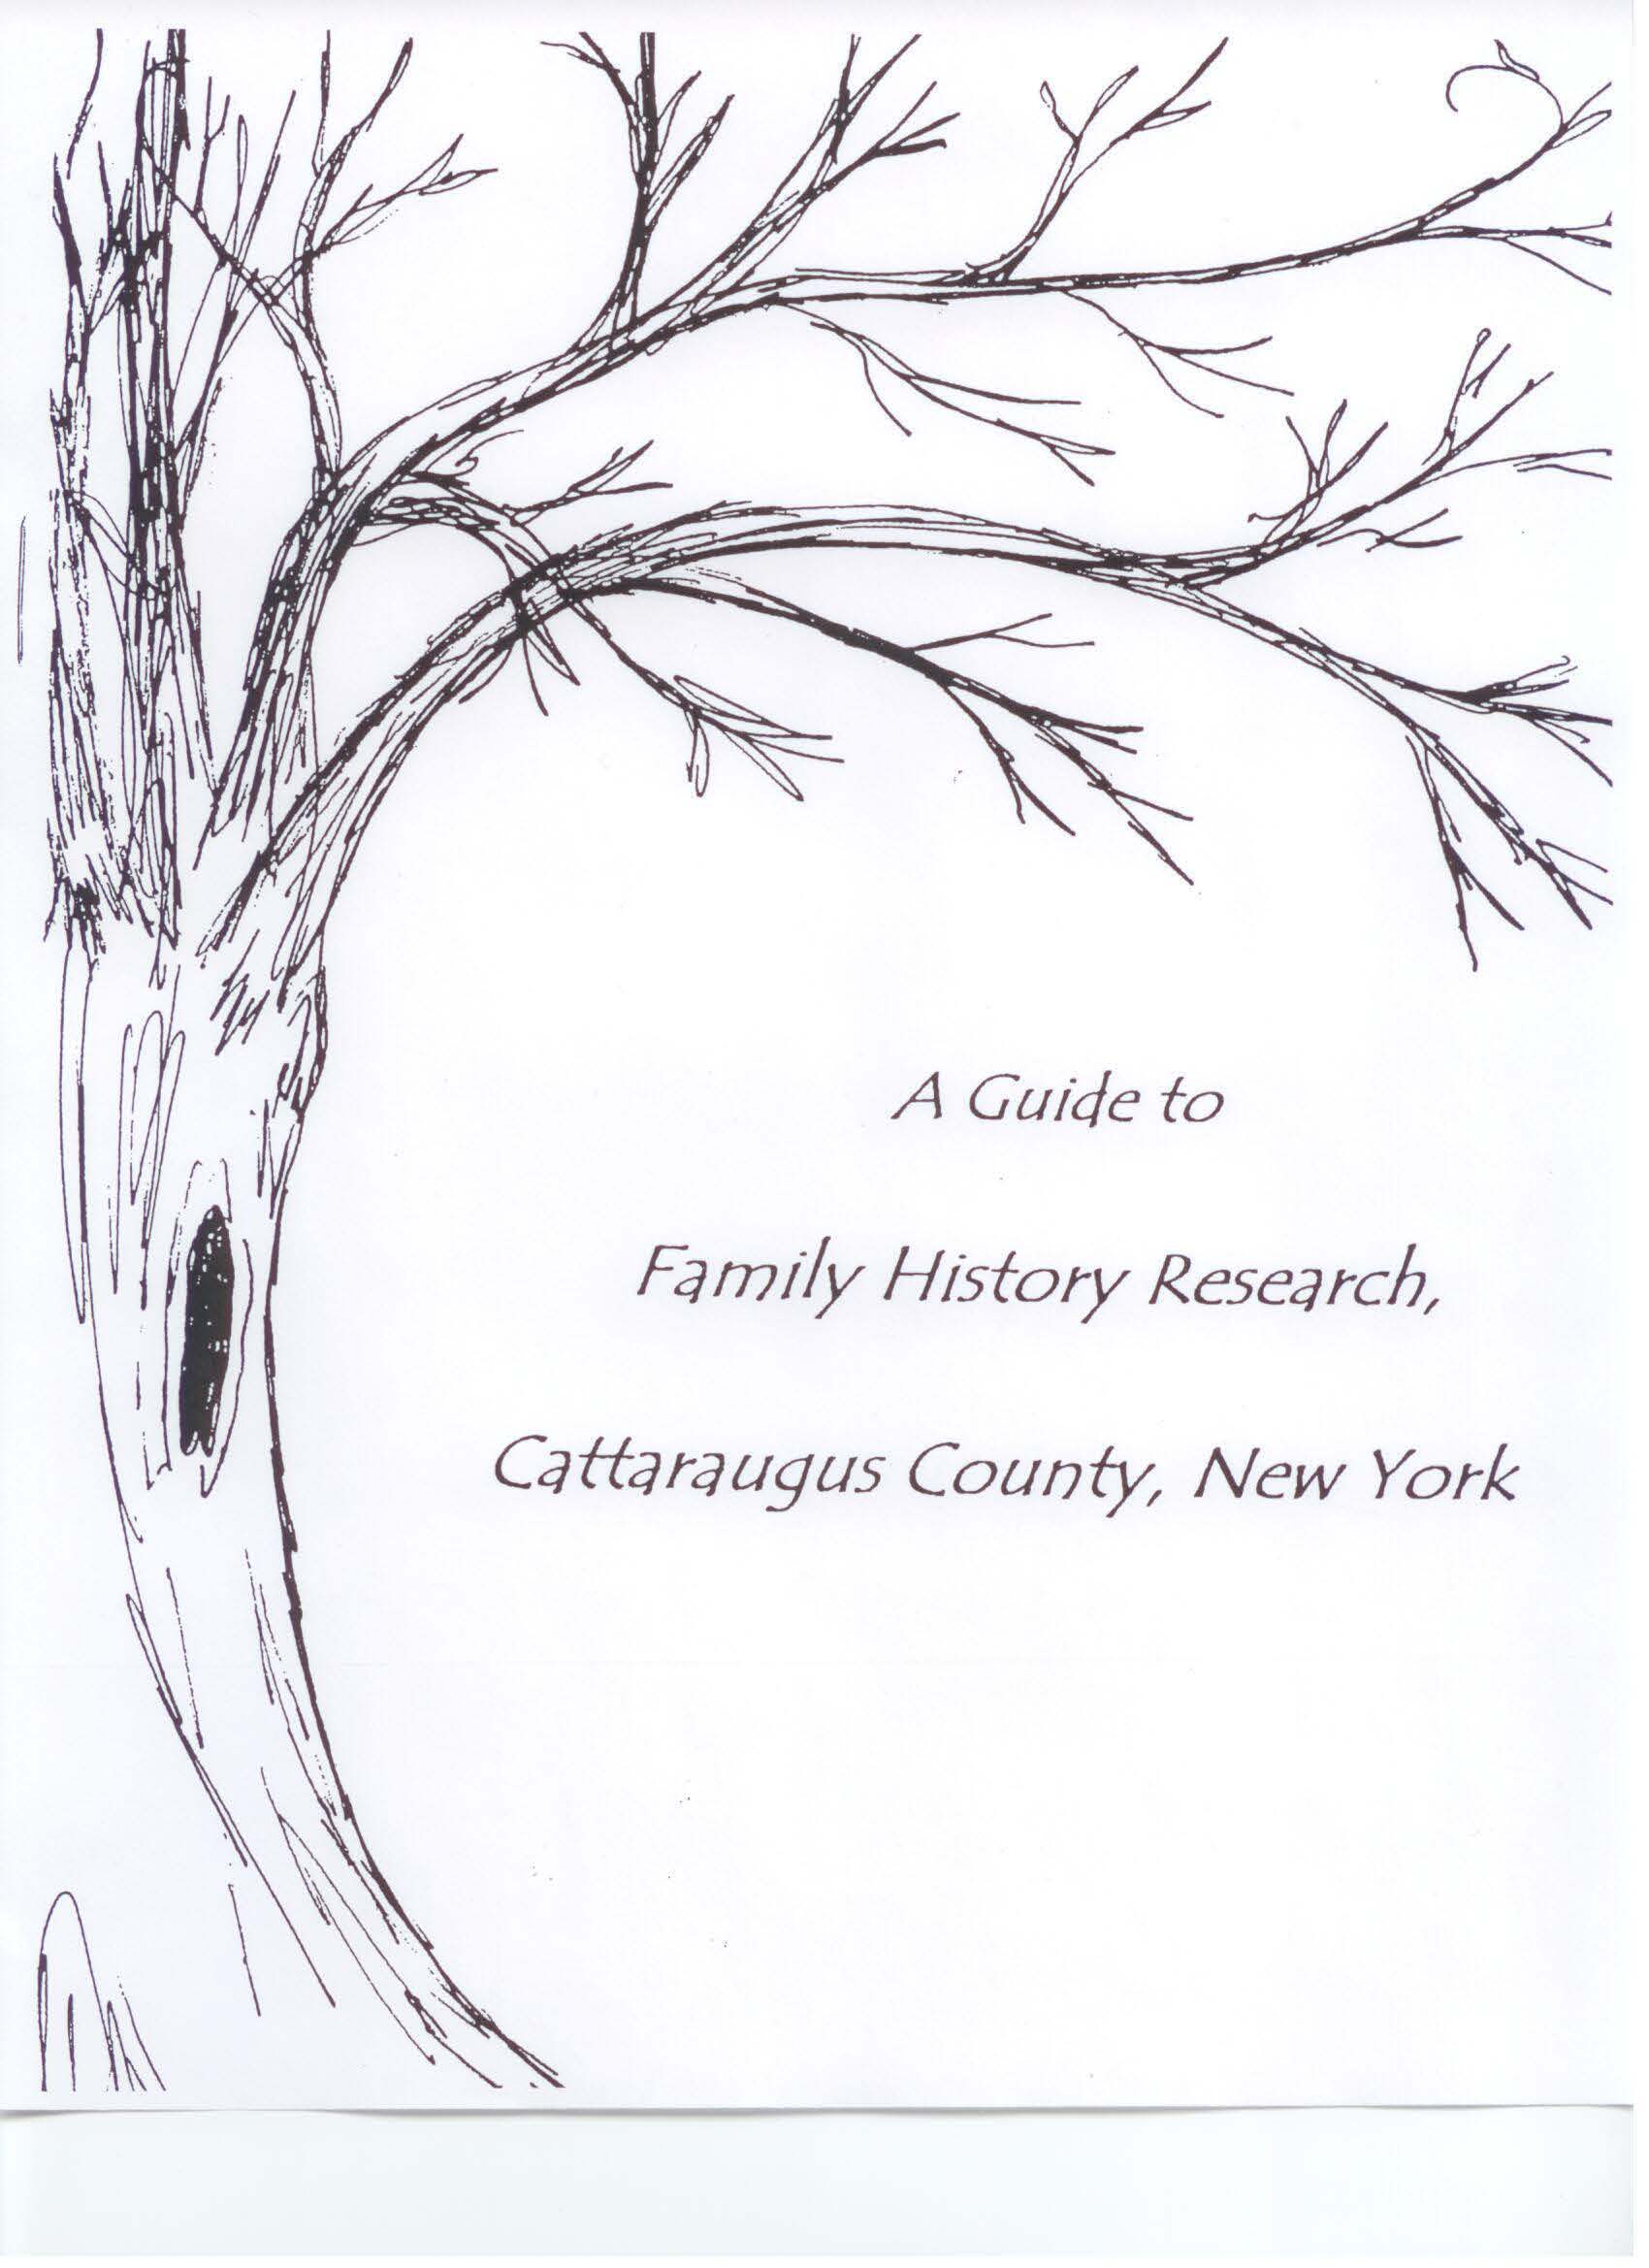 Family History Research Guide Cattaraugus County 